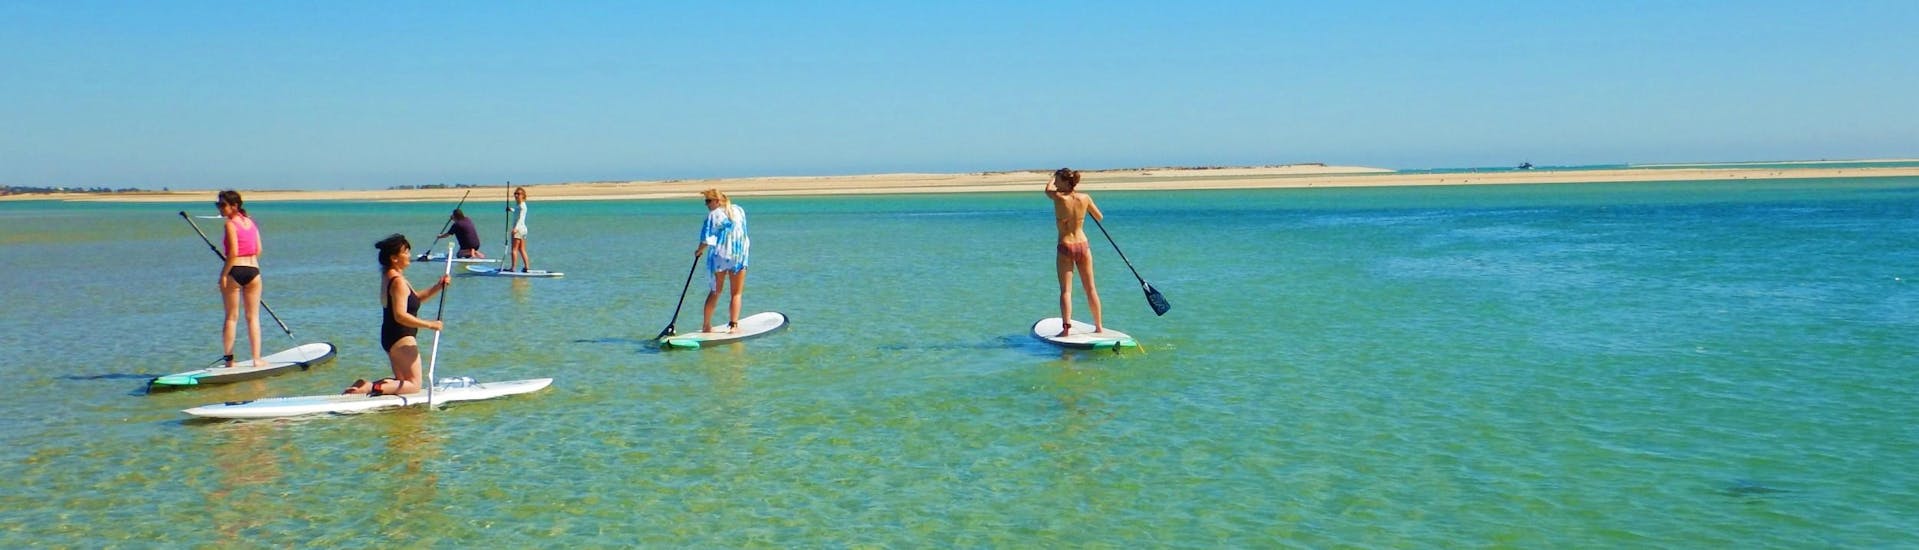 During a Guided SUP Tour in Ria Formosa Natural Park with Kite Culture Algarve, a group of friends is exploring the turquoise, warm waters of the lagoon.